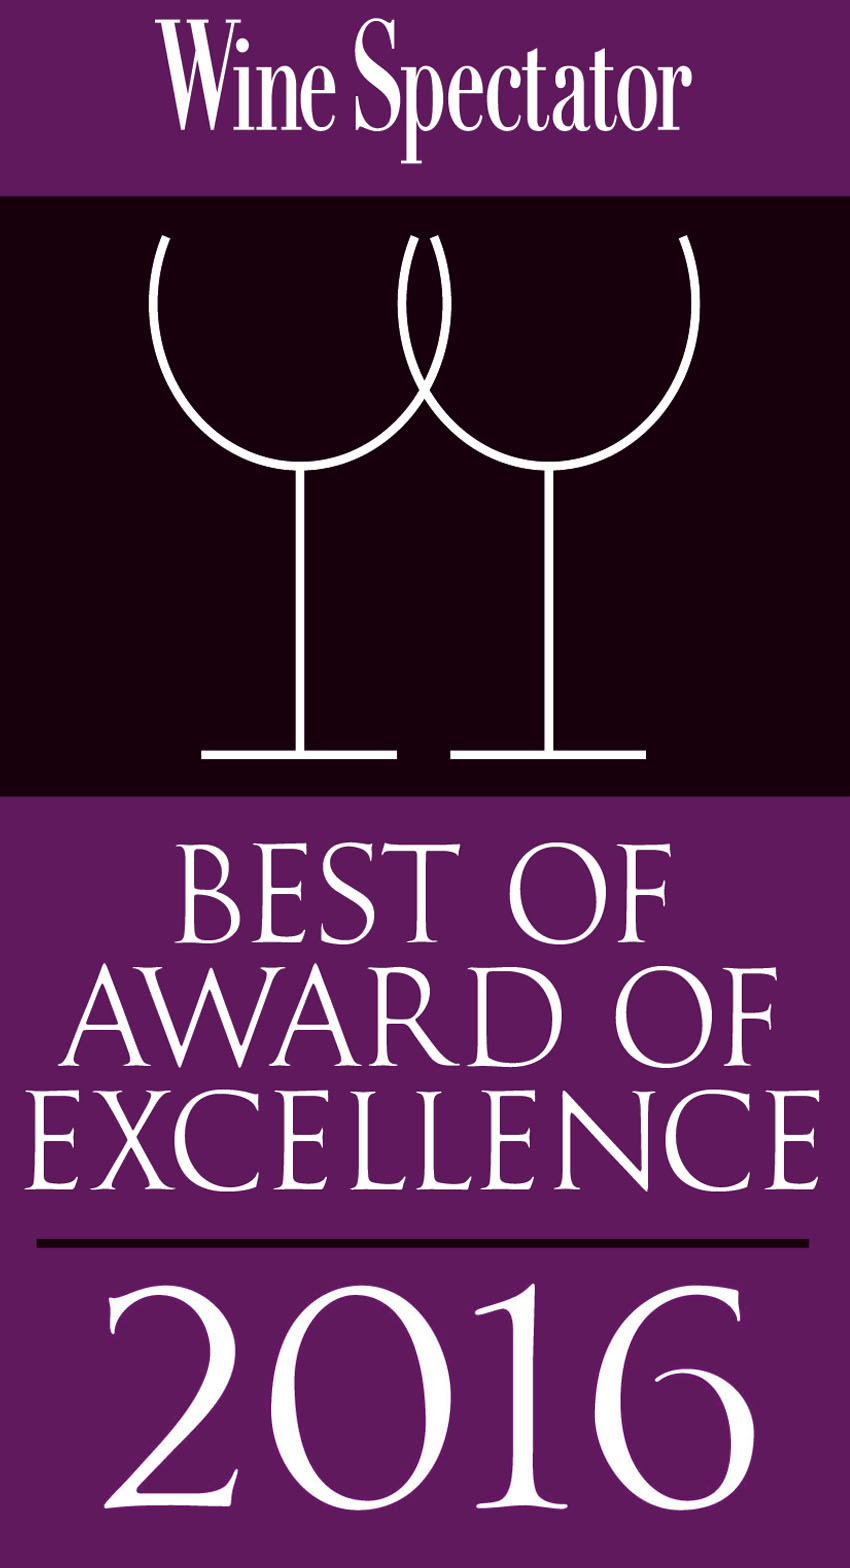 Stake Chophouse & Bar best steakhouse san diego wine spectator best of award of excellence